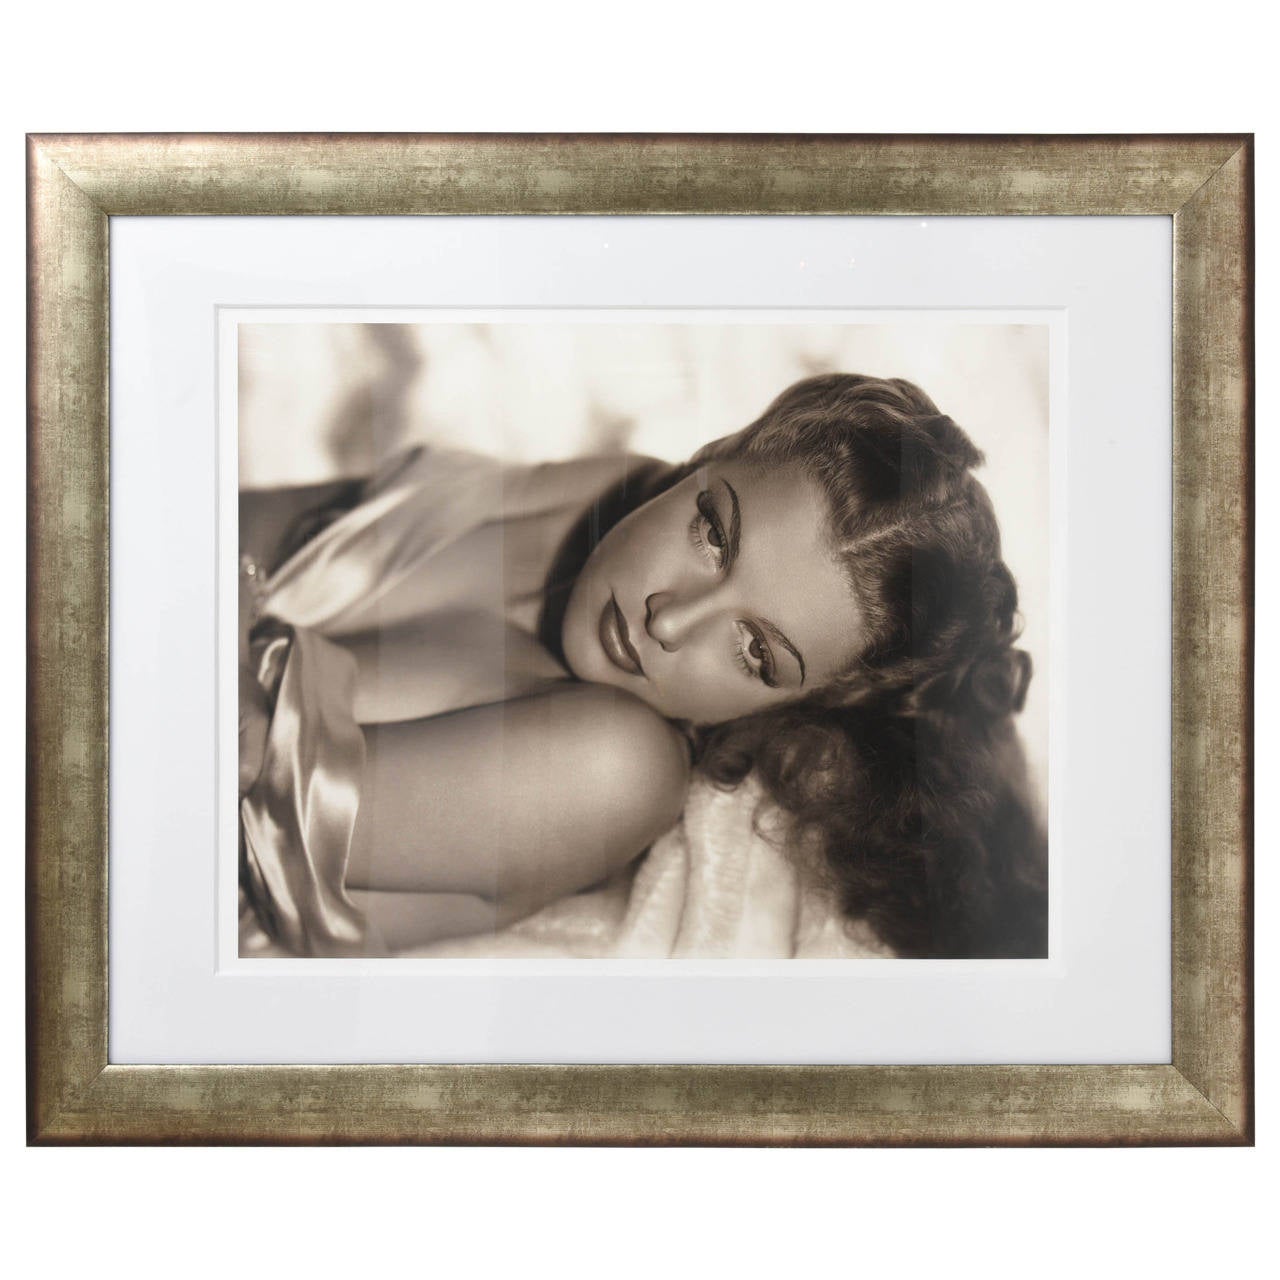 Large Scale, Iconic Photograph of Ann Sheridan:  George Hurrell 1938